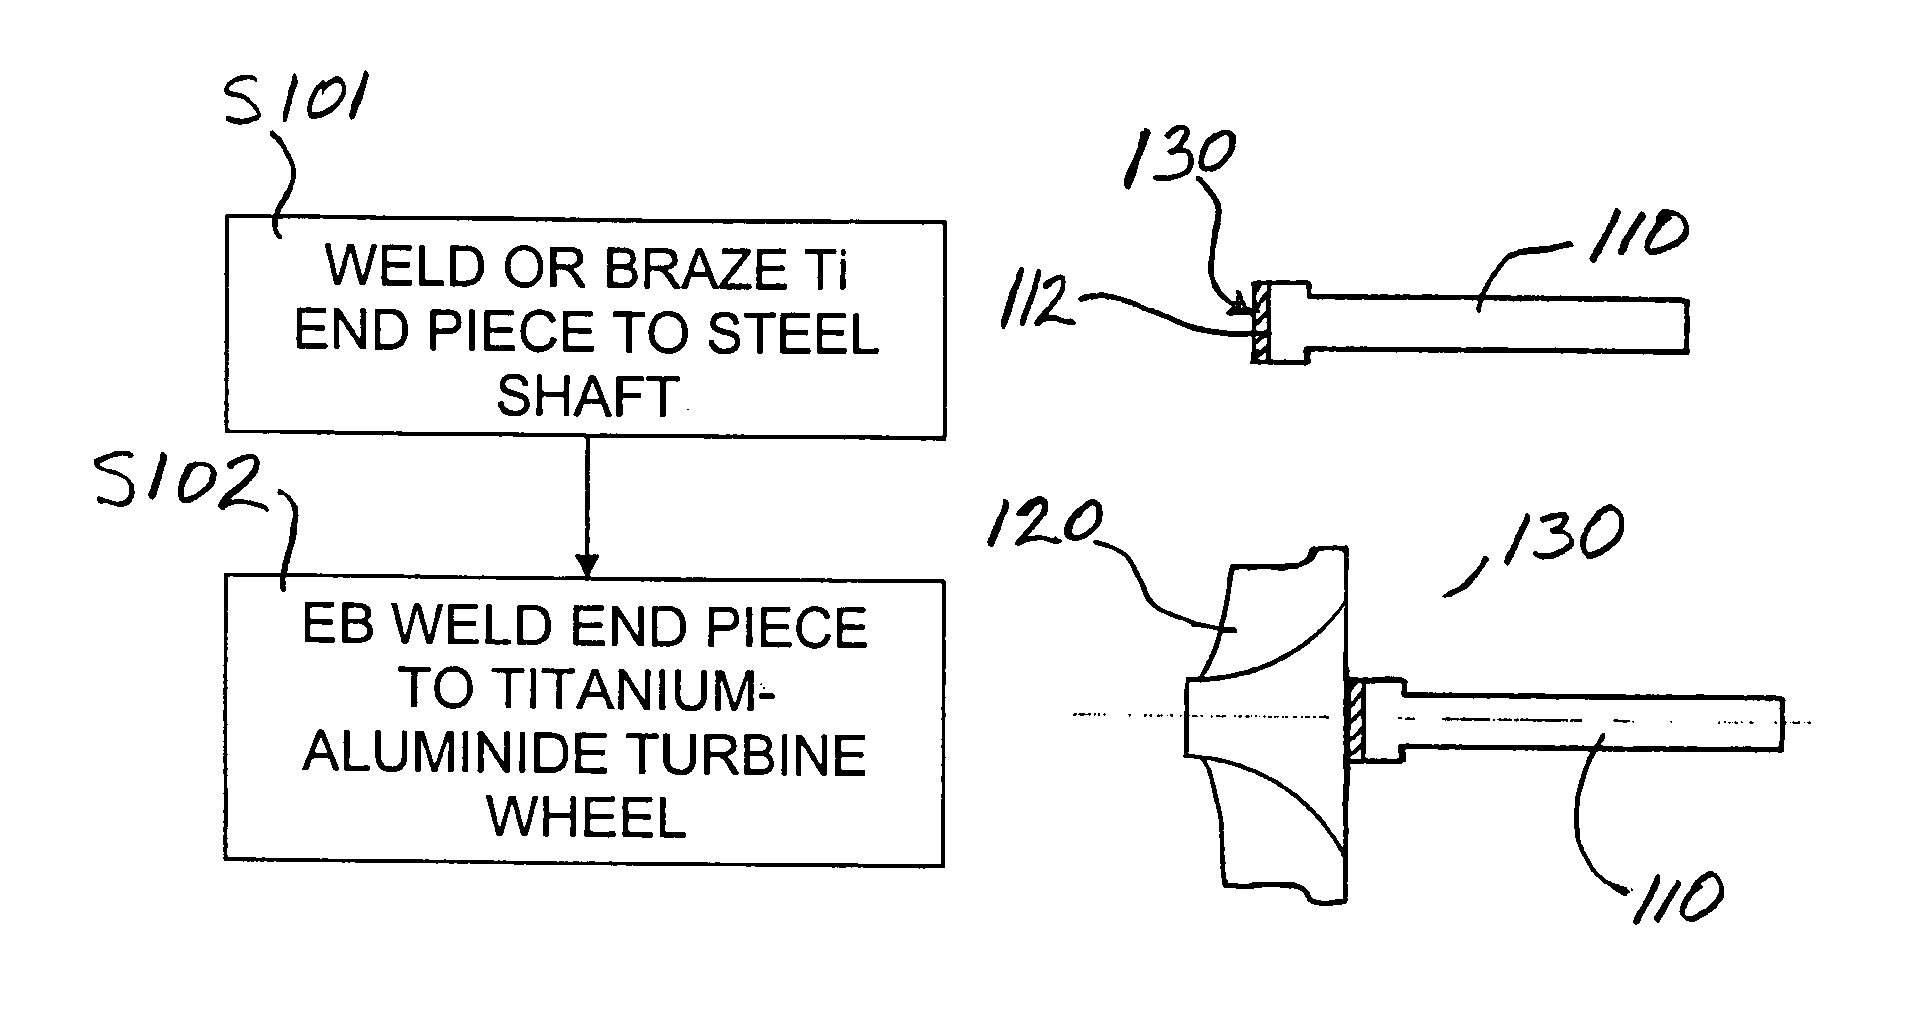 Titanium-aluminide turbine wheel and shaft assembly, and method for making same